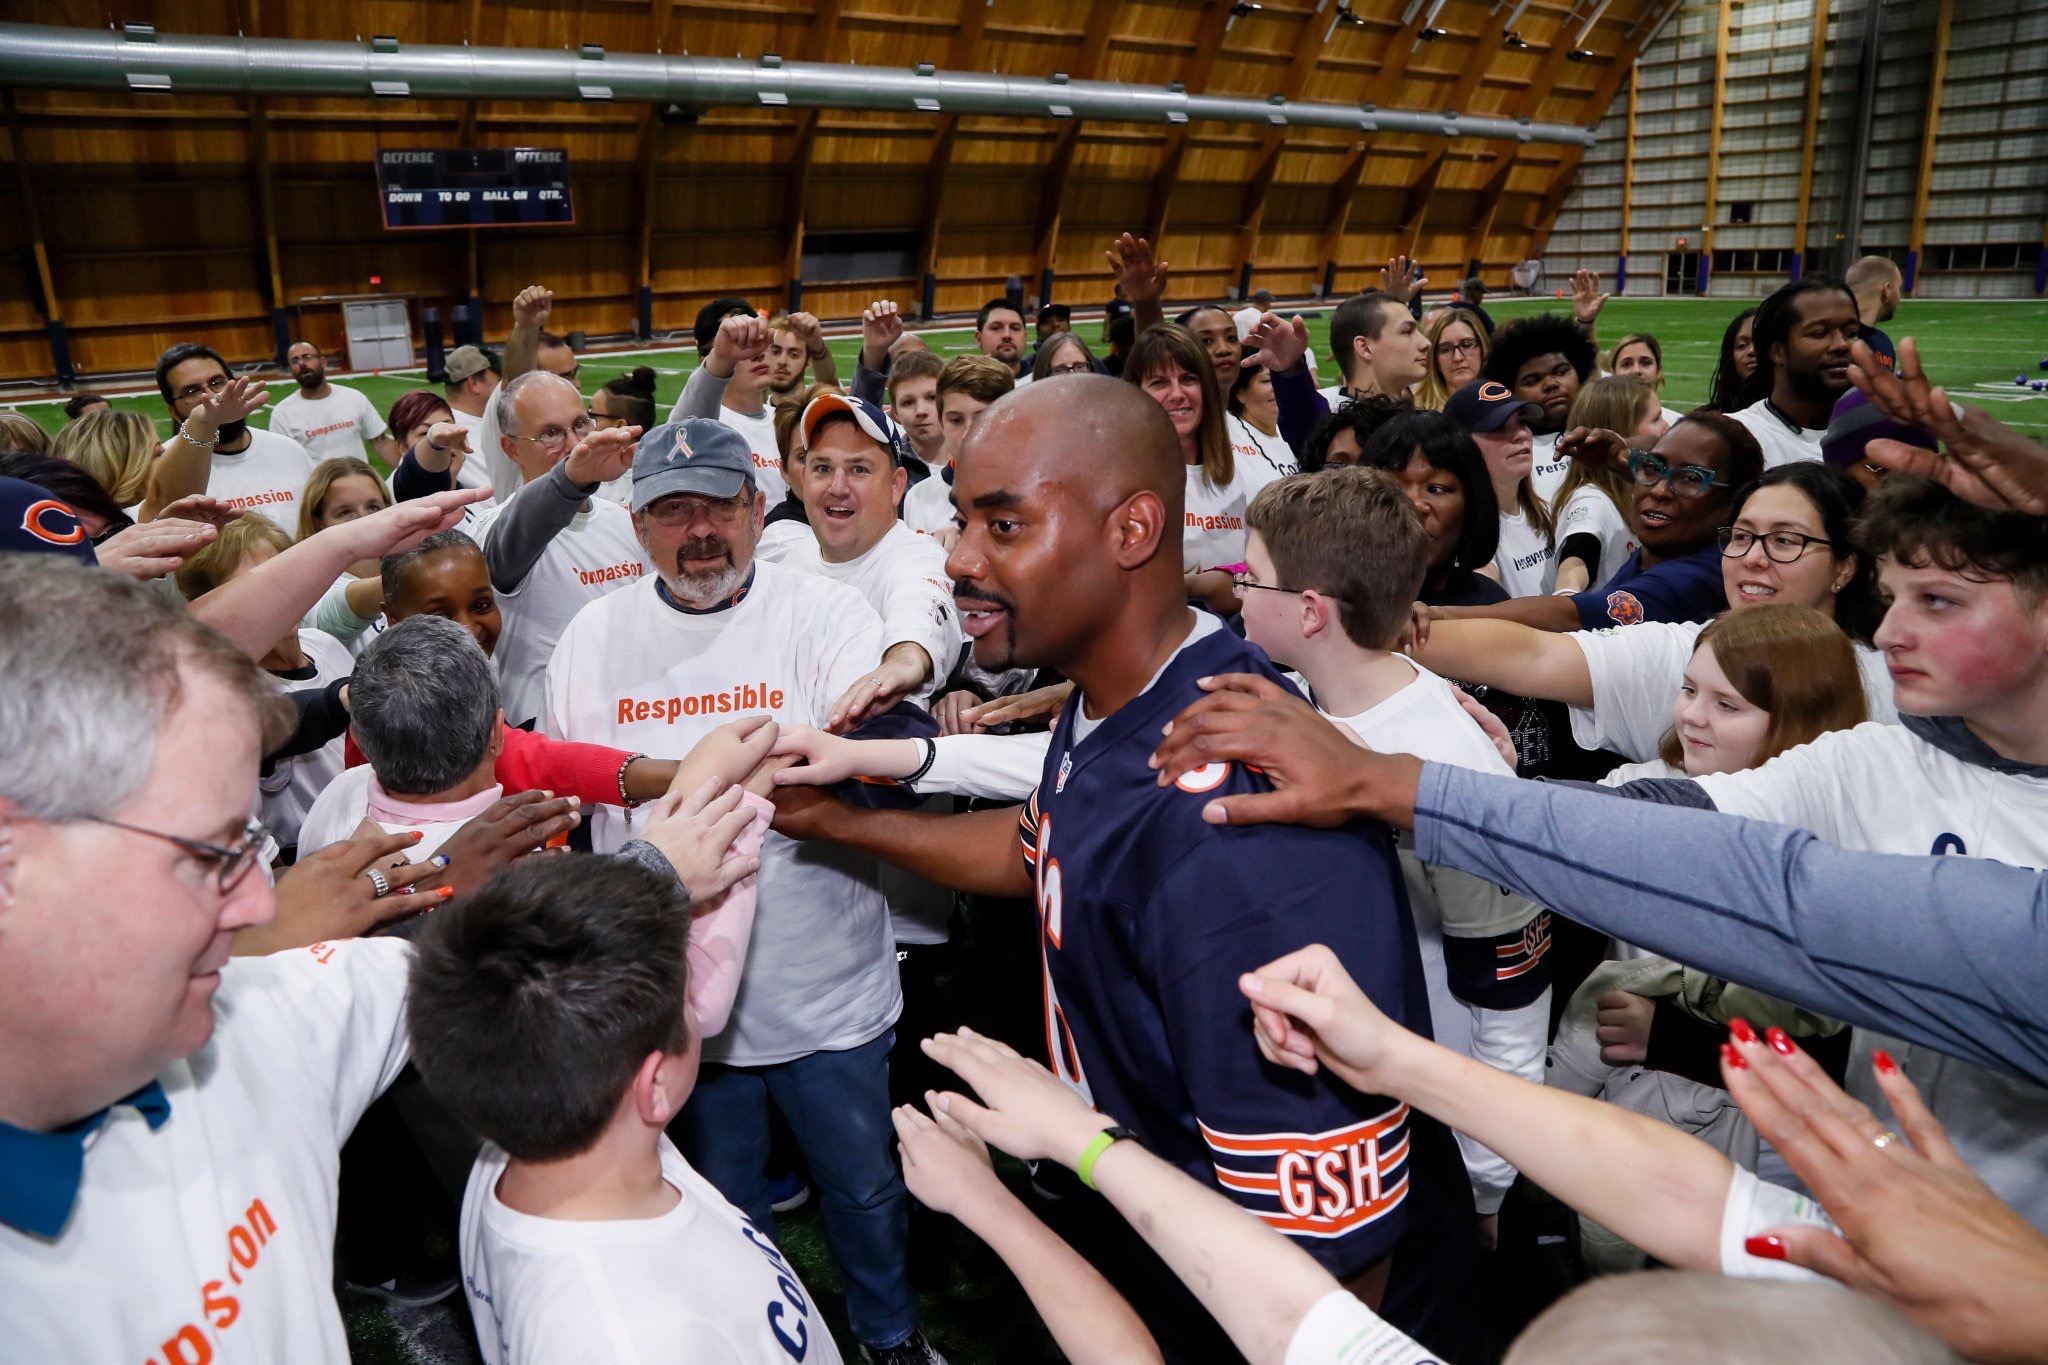 Tackling Cancer Camp with the Chicago Bears 